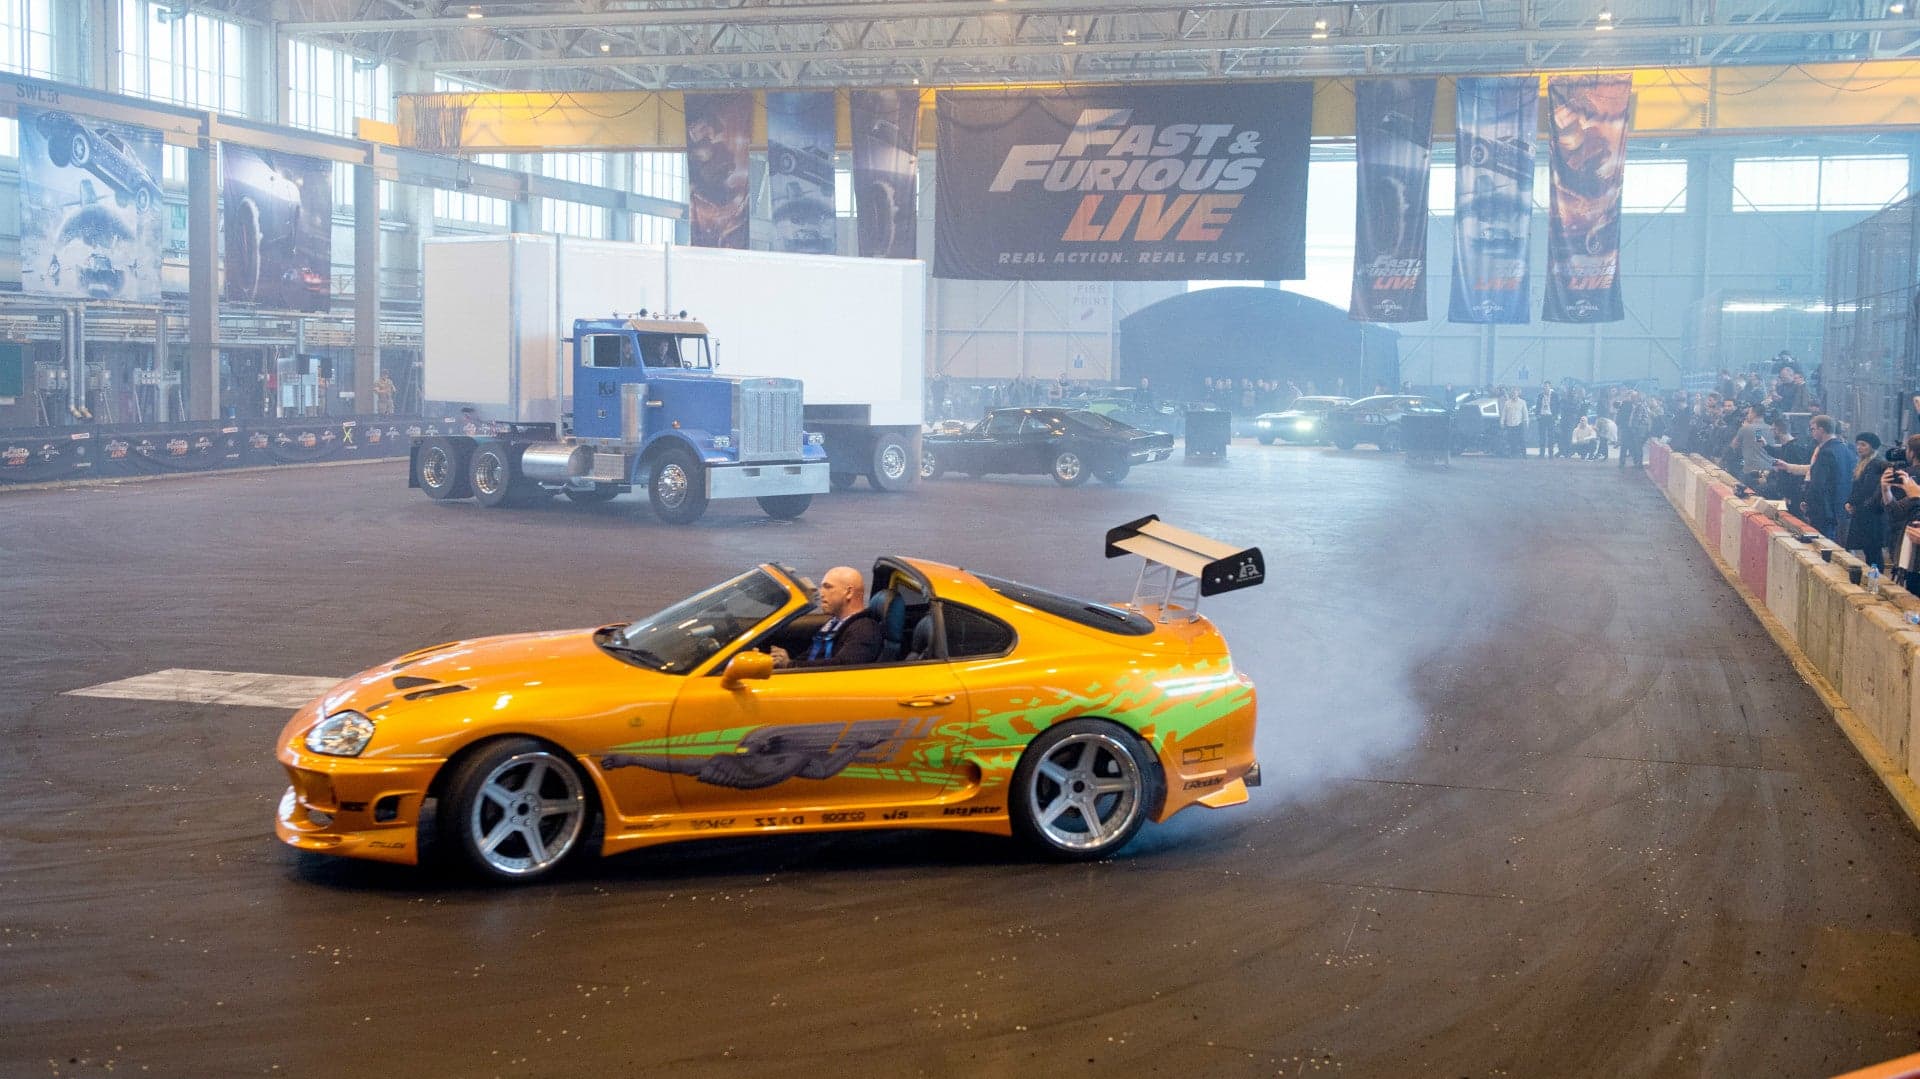 Fast & Furious Live Arena Shows Announced